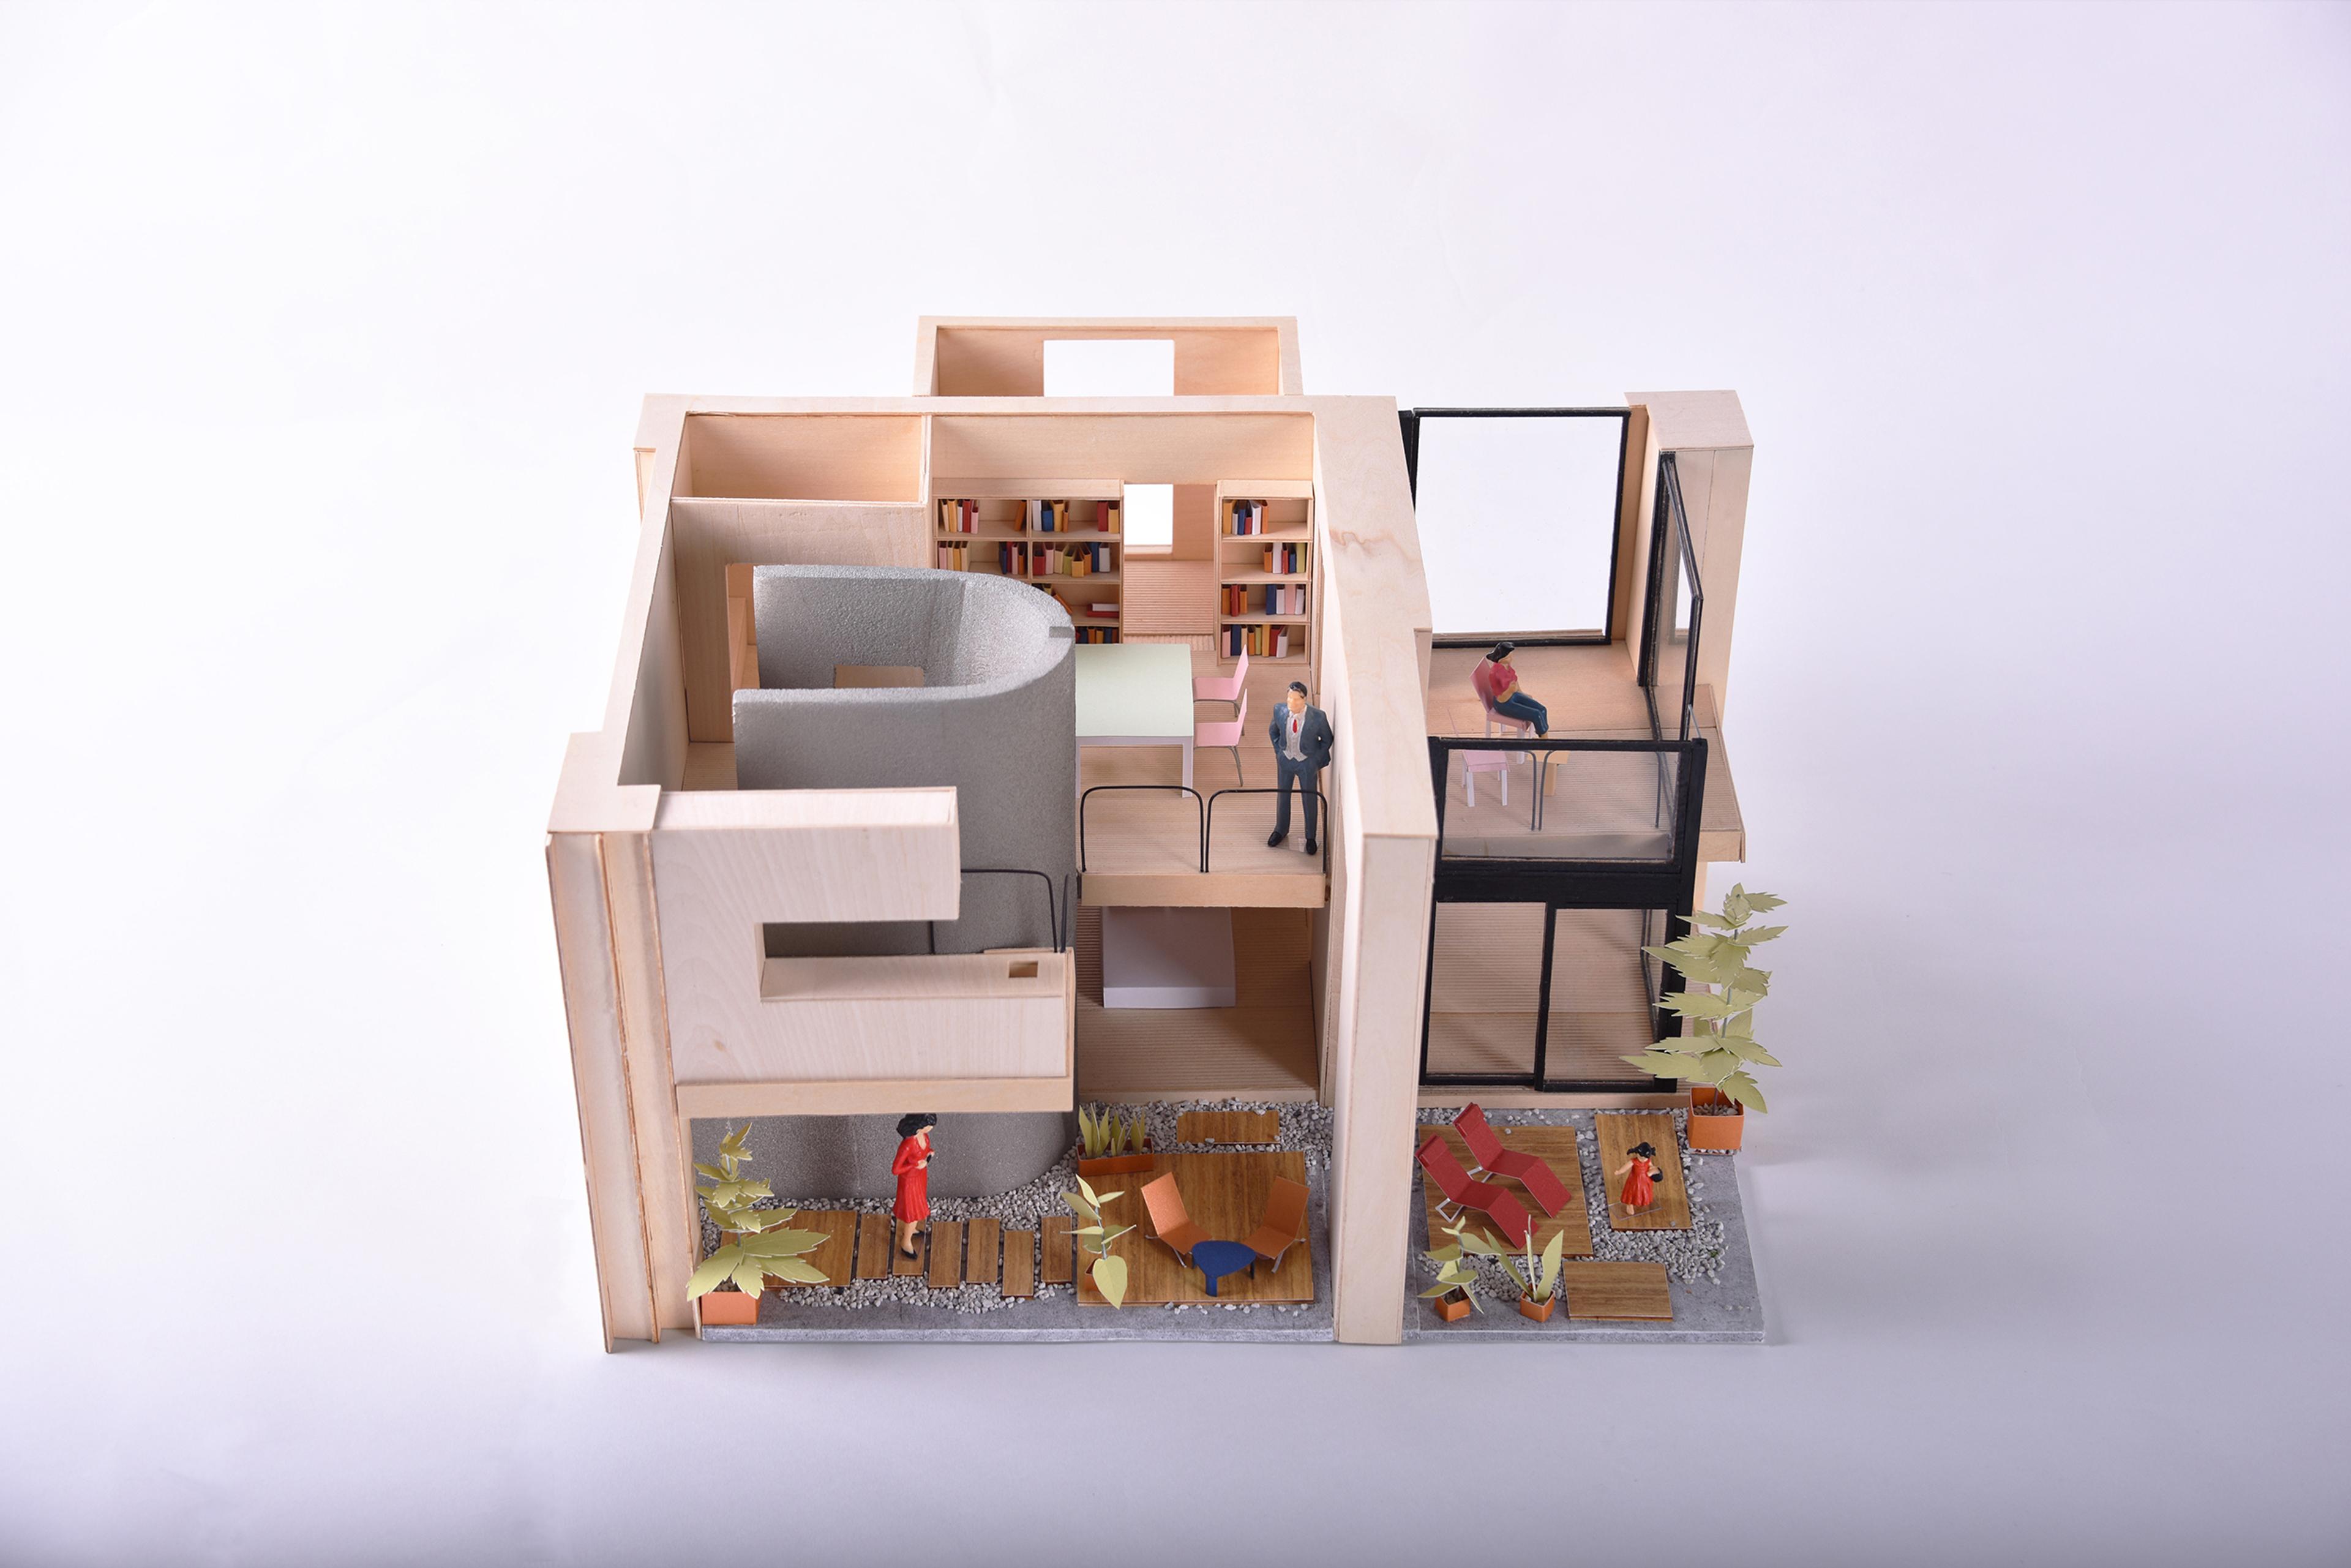 Model of a double-height apartment